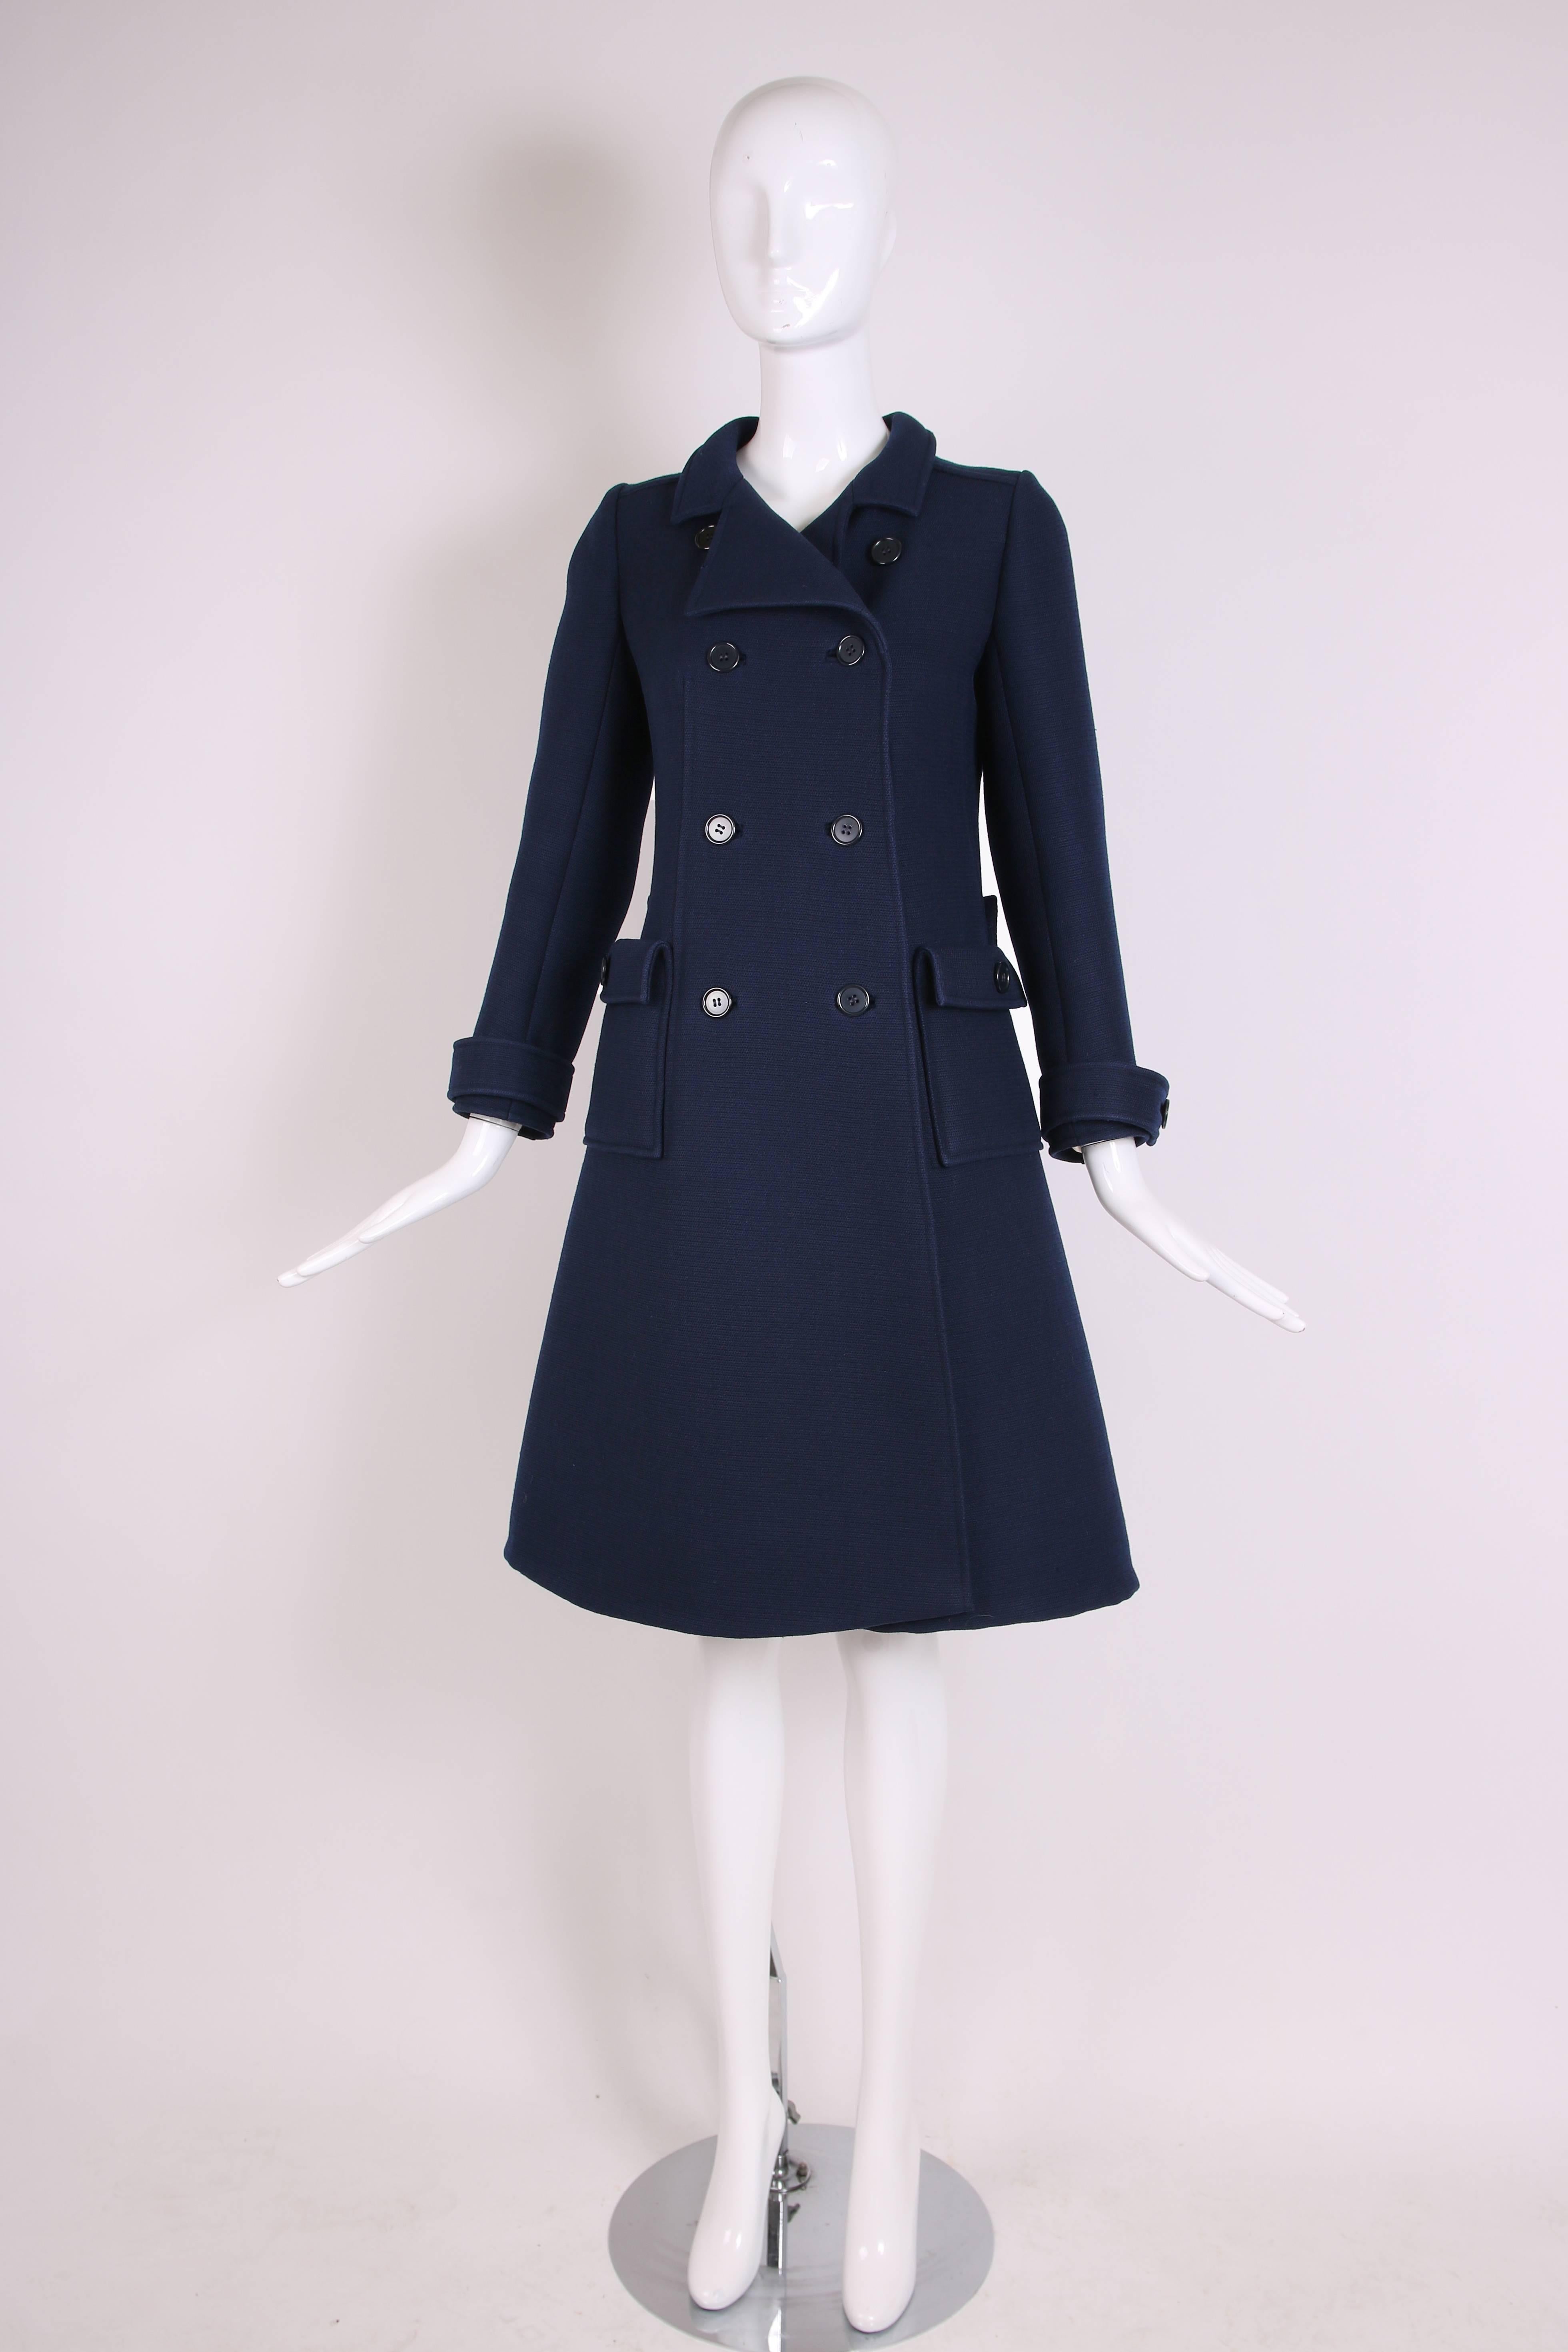 Black 1960's Courreges for Bonwit Teller Navy Mod Space Age Wool Double-Breasted Coat